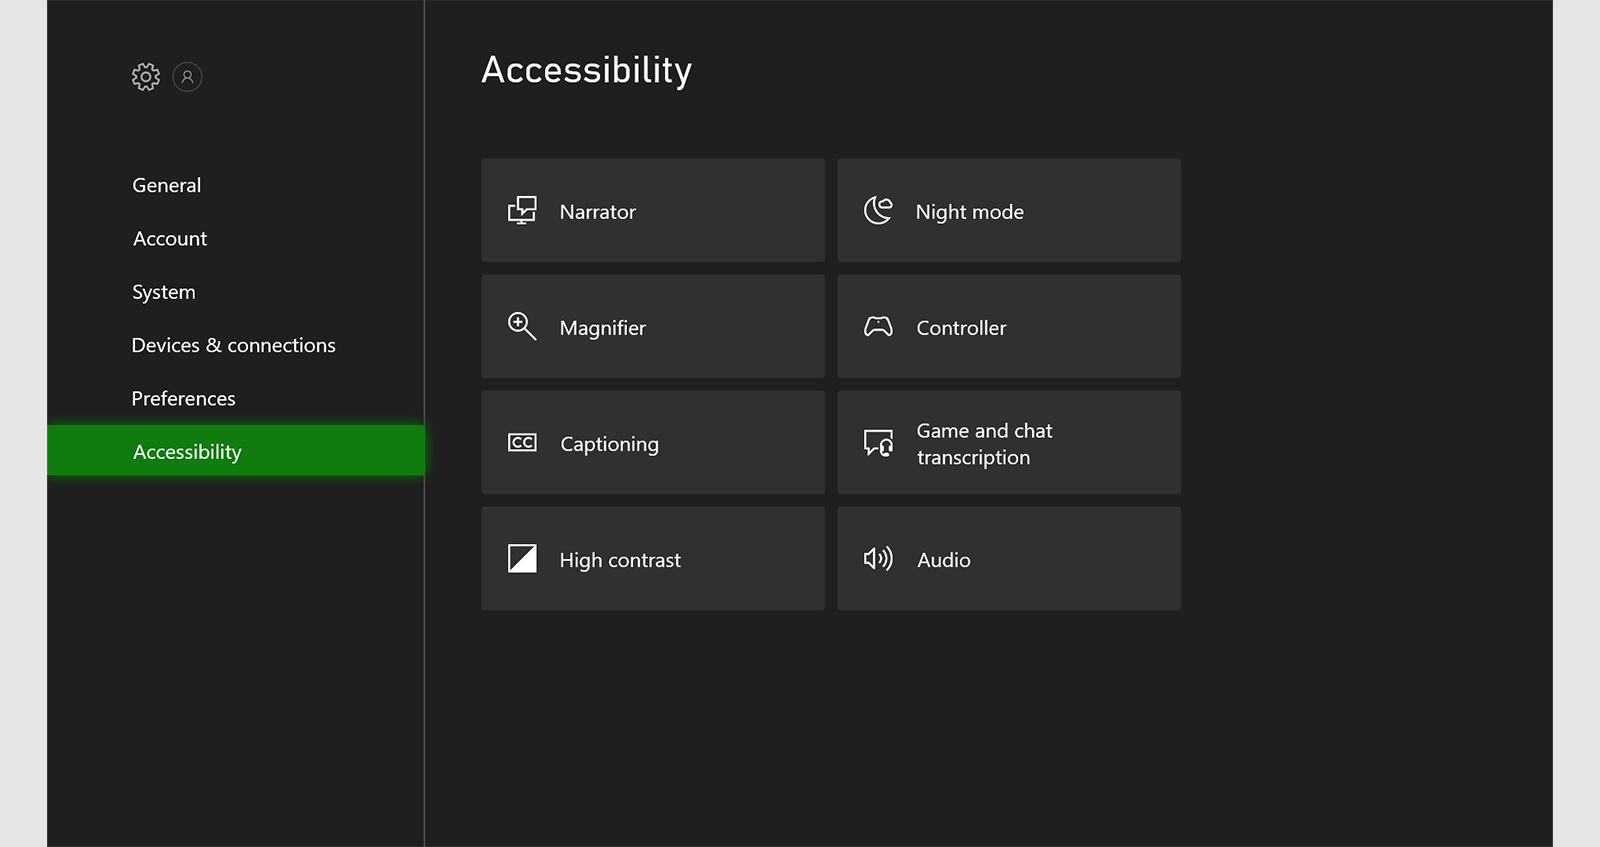 Screenshot of the Accessibility options under a Settings menu.